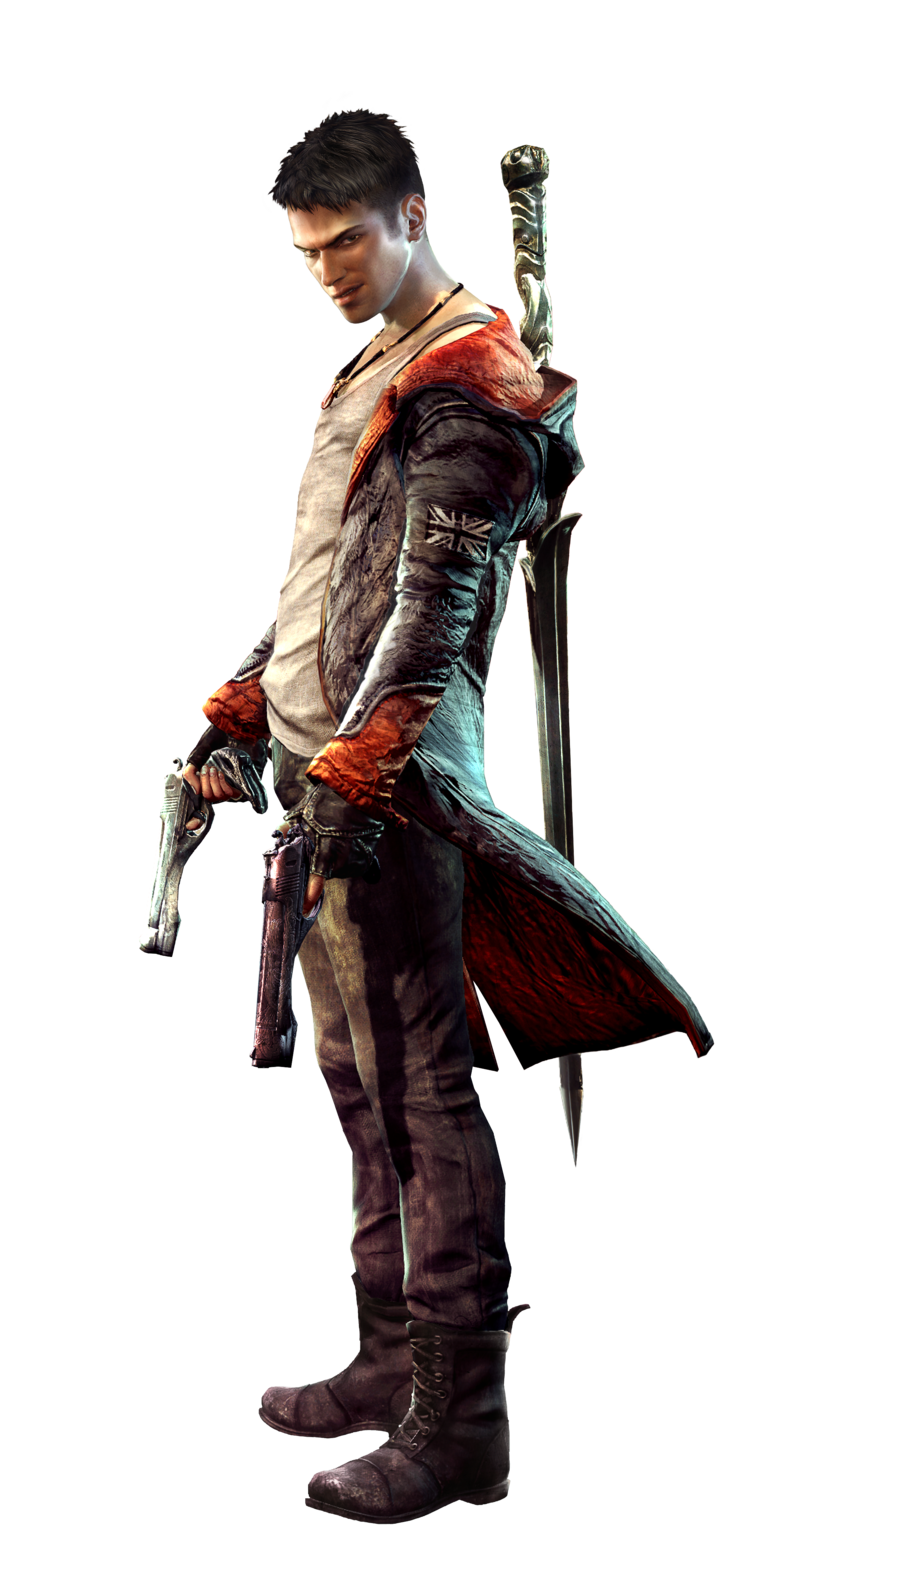 Devil May Cry Png Transparent Image - Devil May Cry, Transparent background PNG HD thumbnail